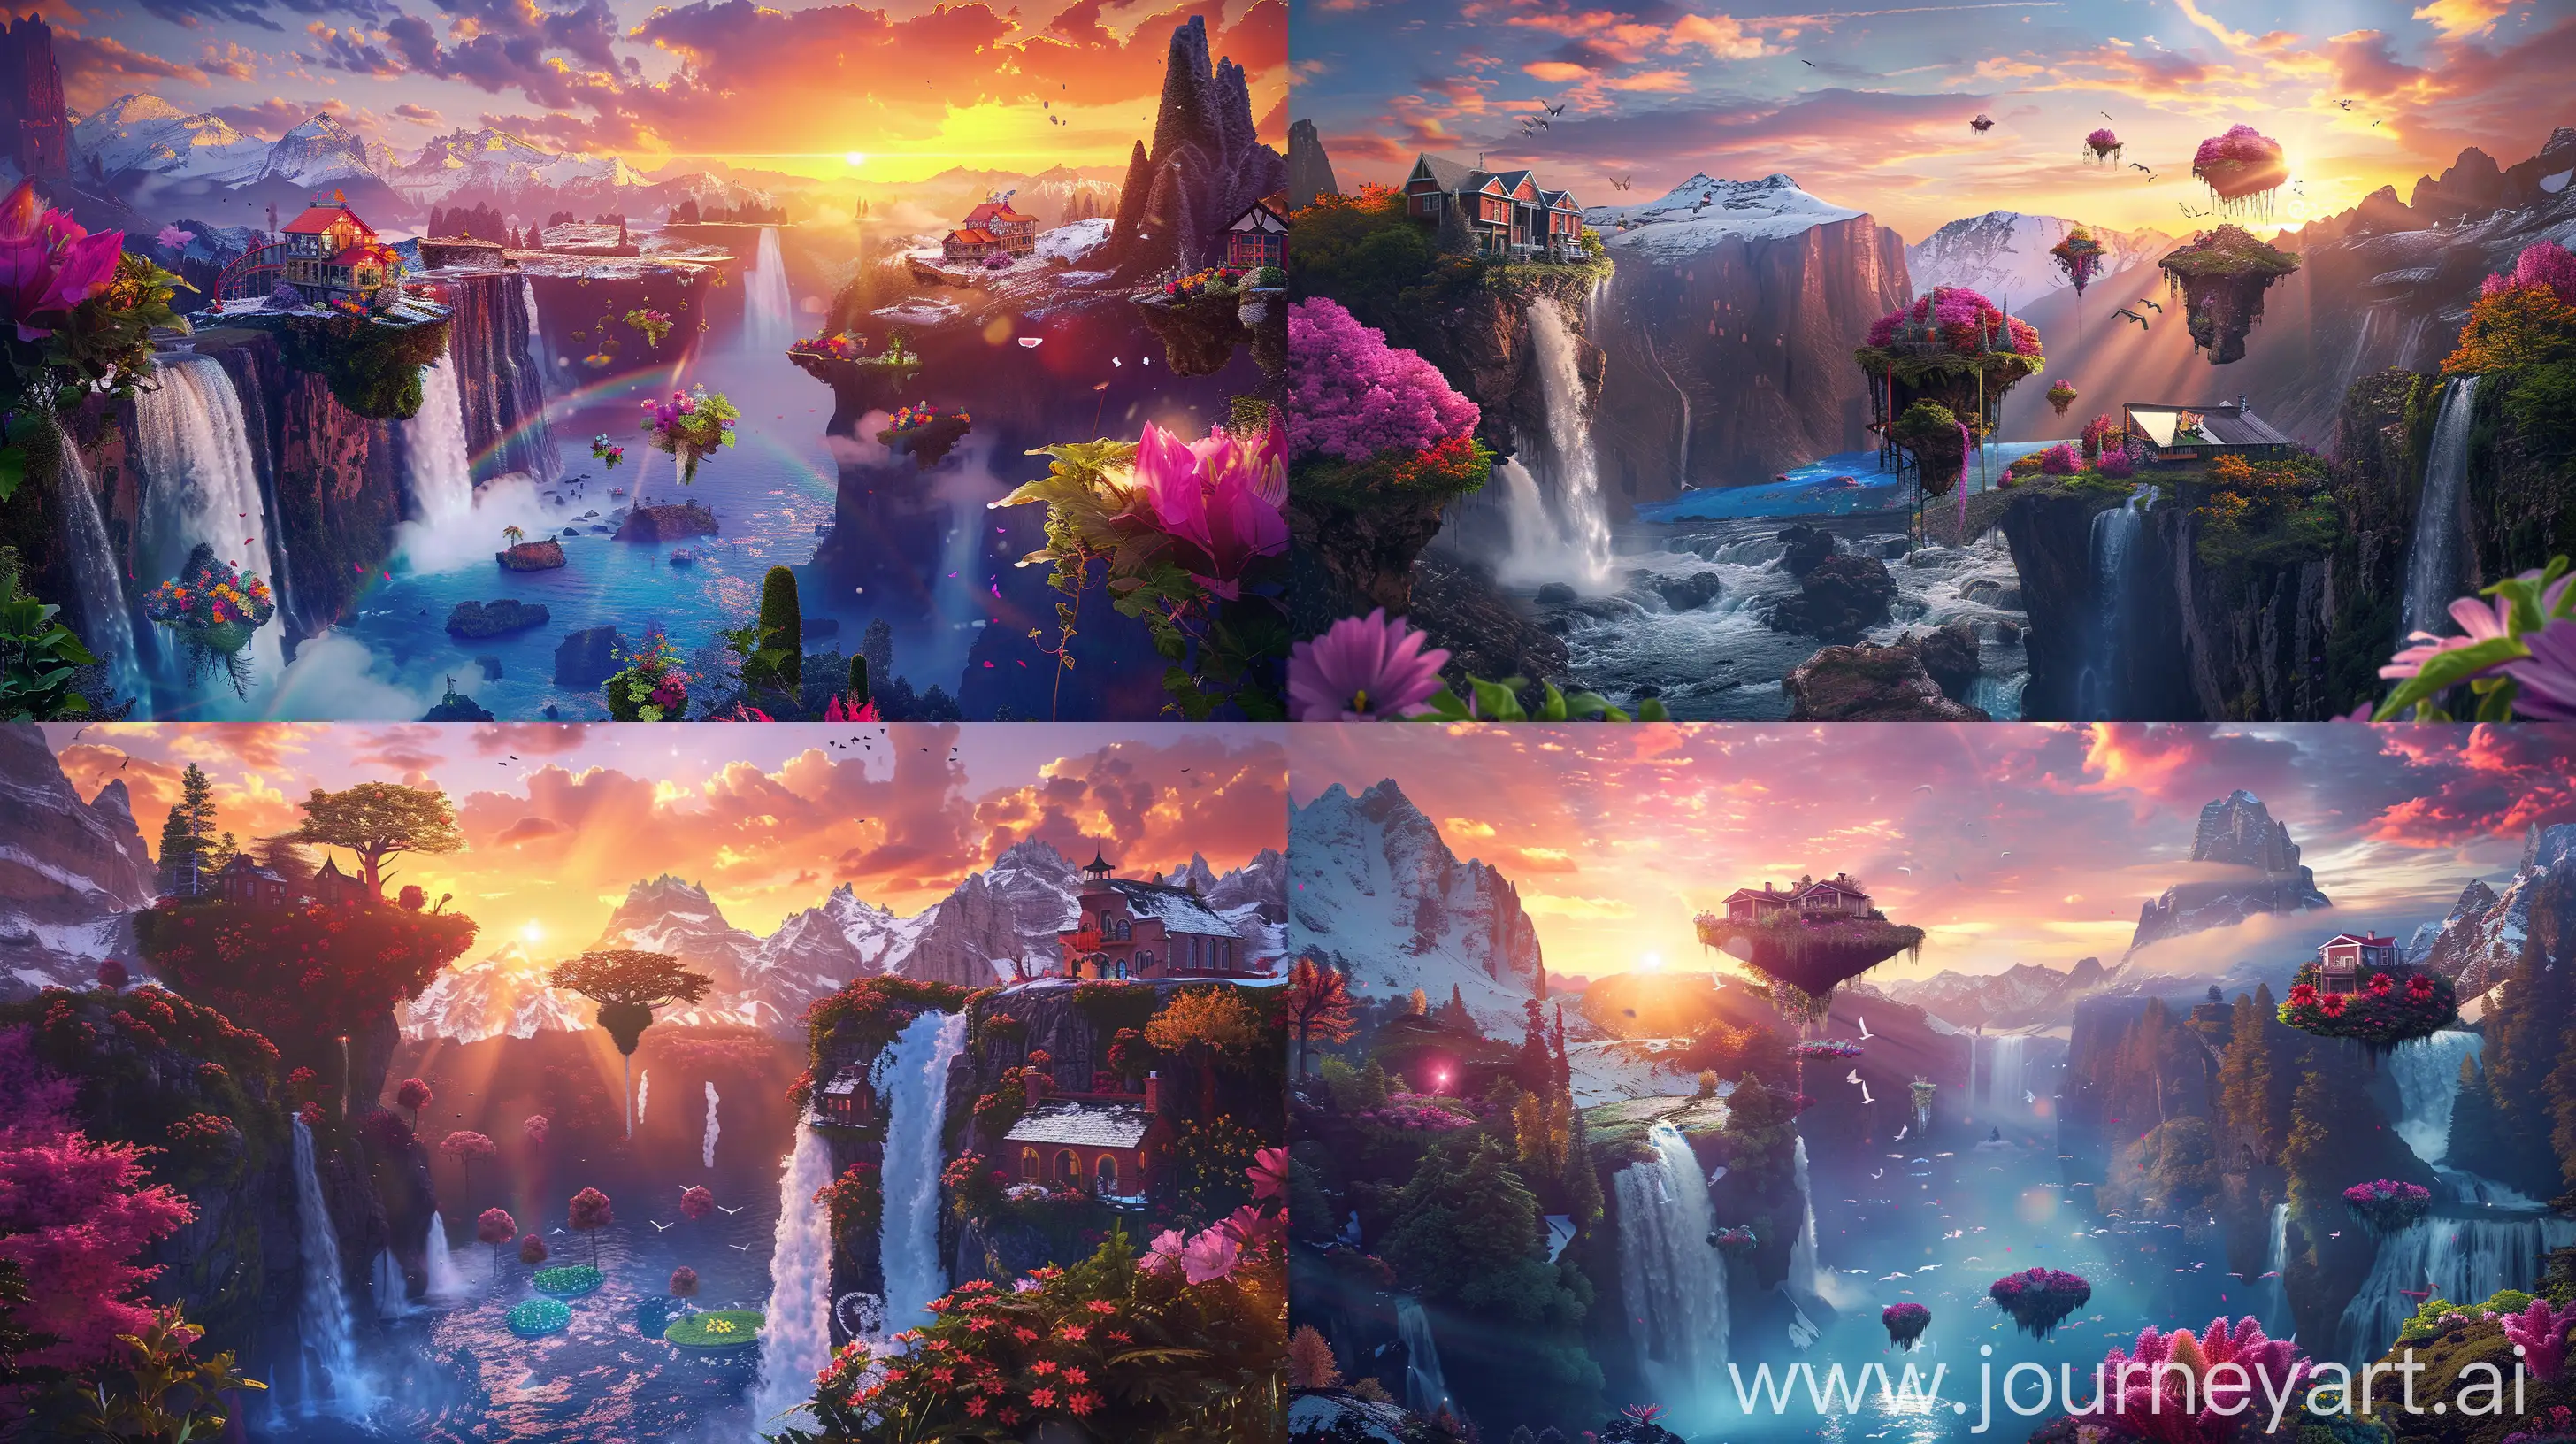 a colorful fantasy landscape with waterfalls, floating islands, strange flowers, houses inside trees. atmospheric lighting, sunset, vivid colors. sunrays. mountains with snow. very realistic, very detailed. --ar 16:9